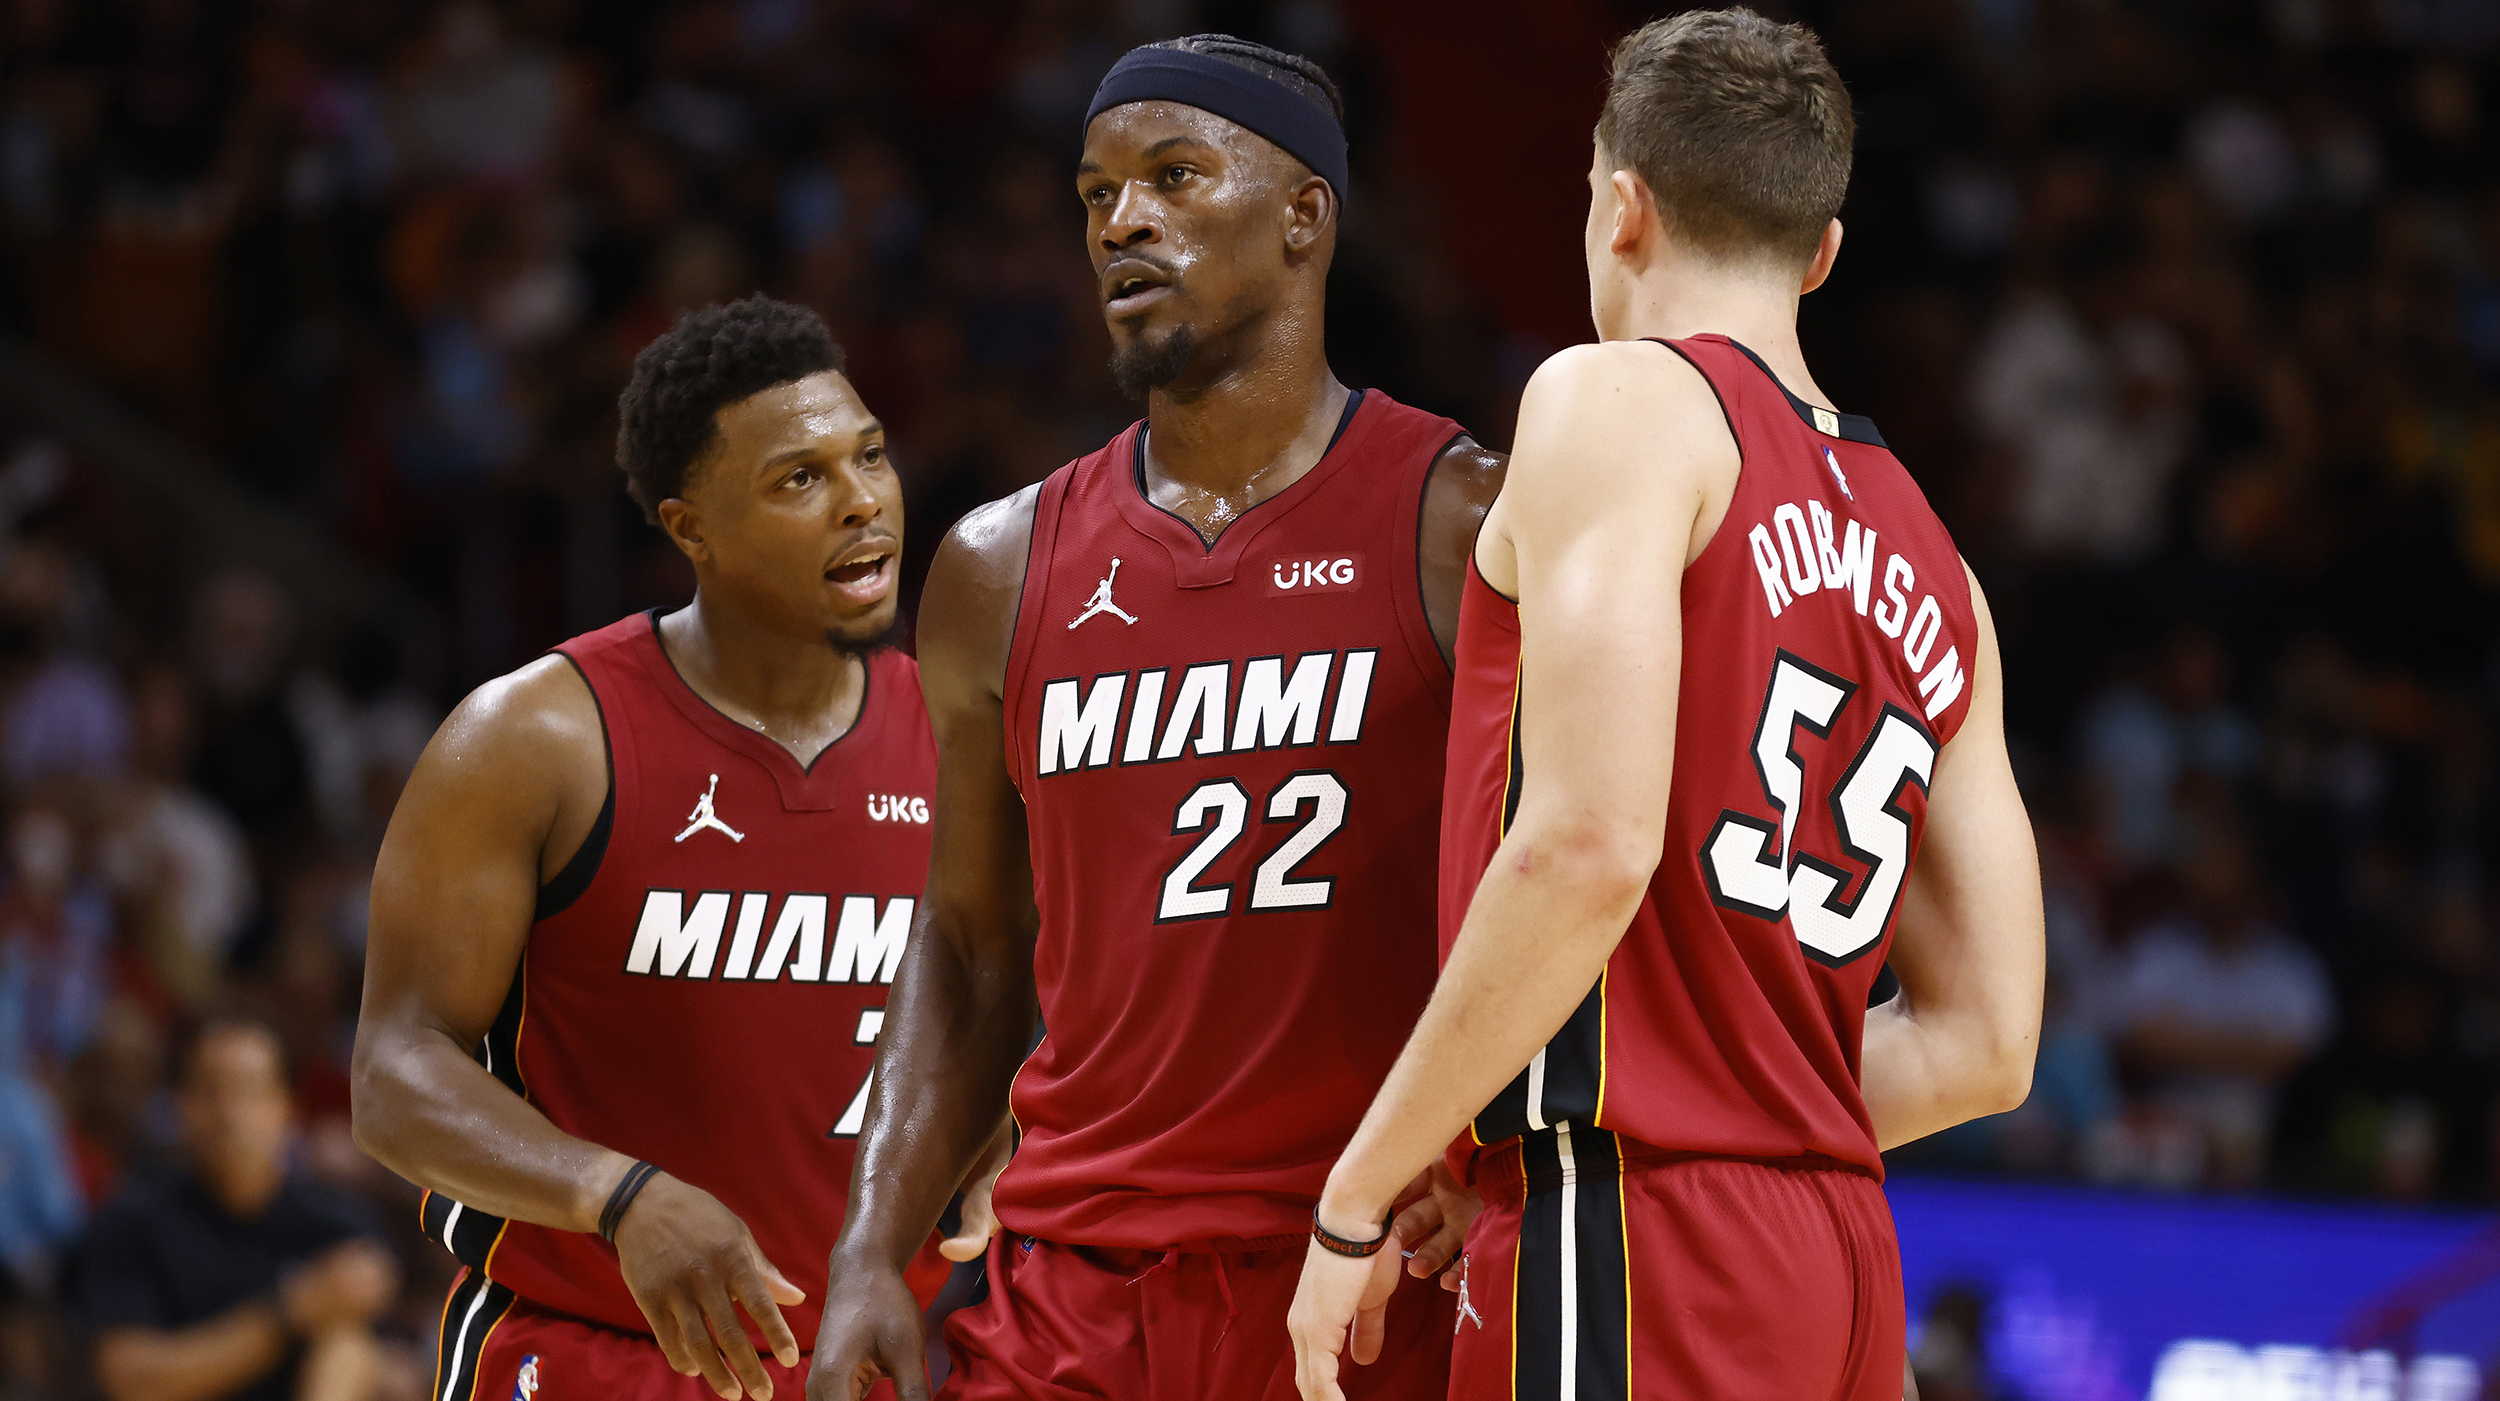 Kyle Lowry #7, Jimmy Butler #22, Duncan Robinson #55 of the Miami Heat look on against the Milwaukee Bucks at FTX Arena on October 21, 2021 in Miami, Florida.